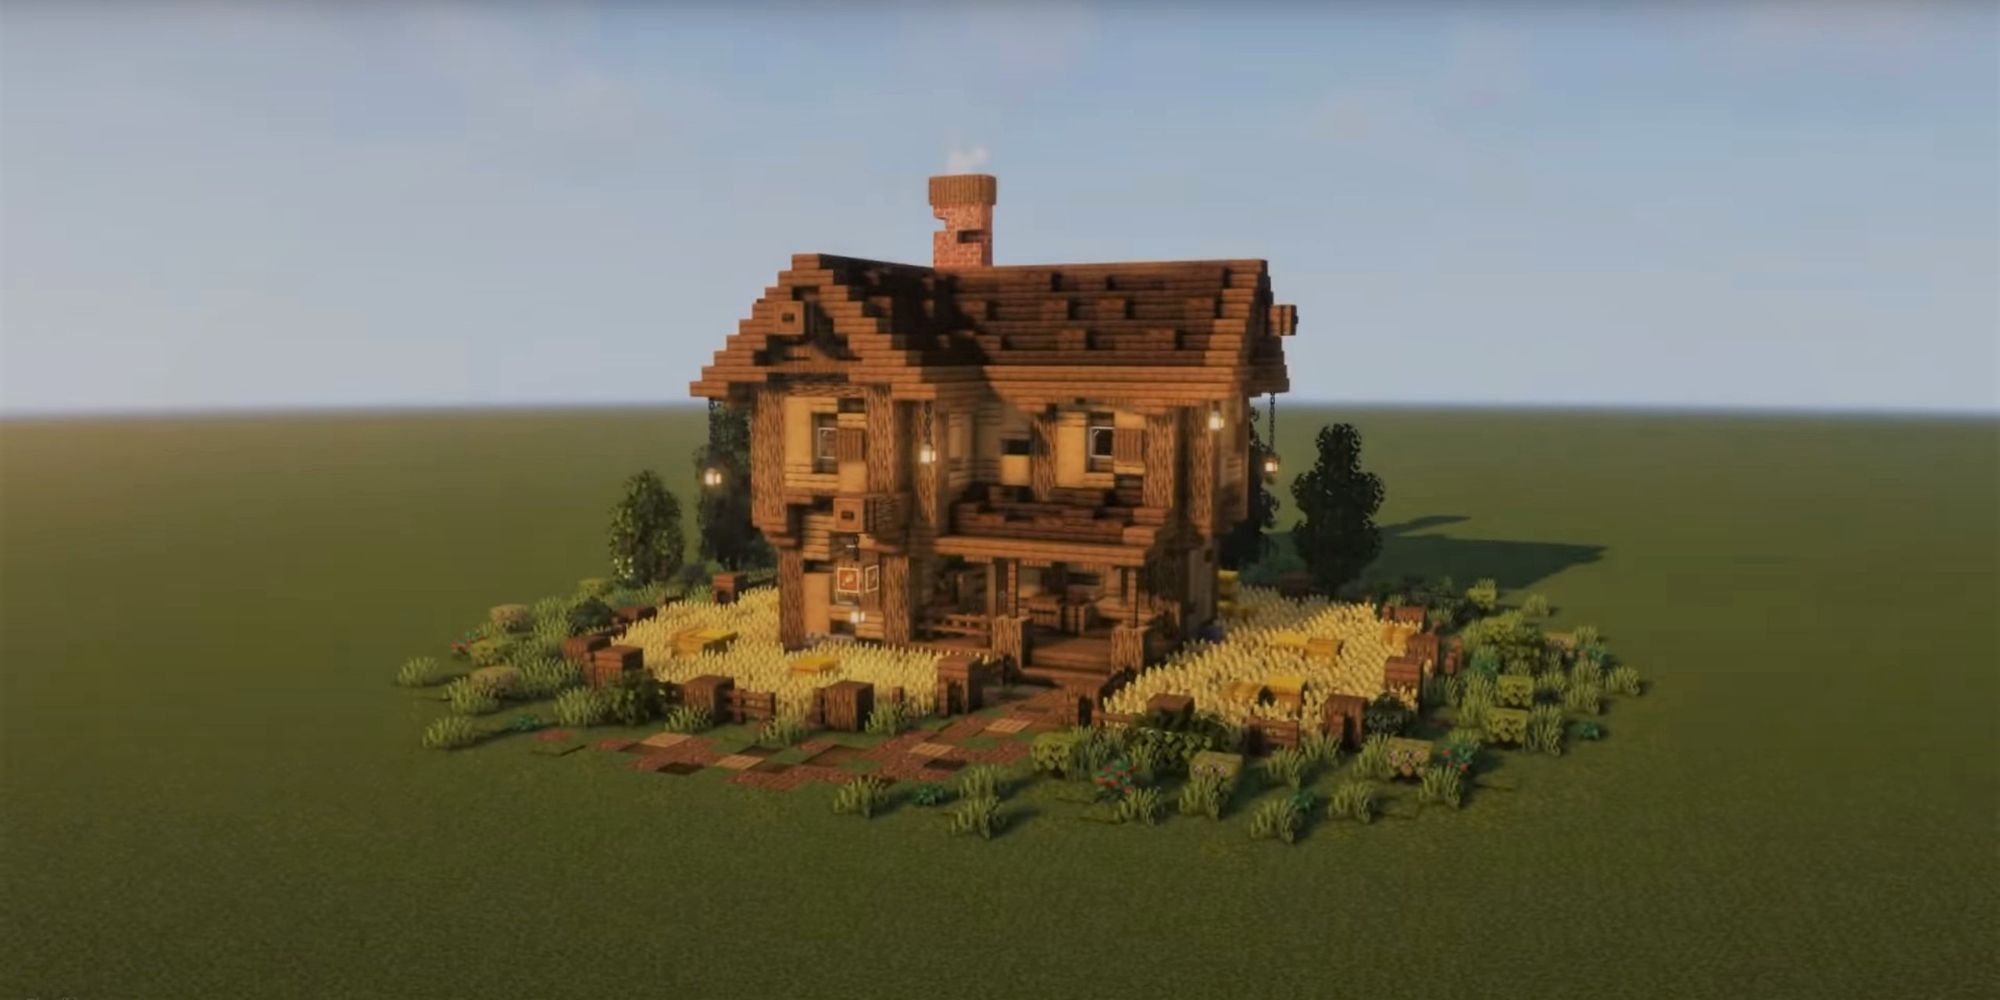 An image from Minecraft of an upgraded Villager Farmhouse. This two story house is made out of wood and features multiple wheat fields around the home.